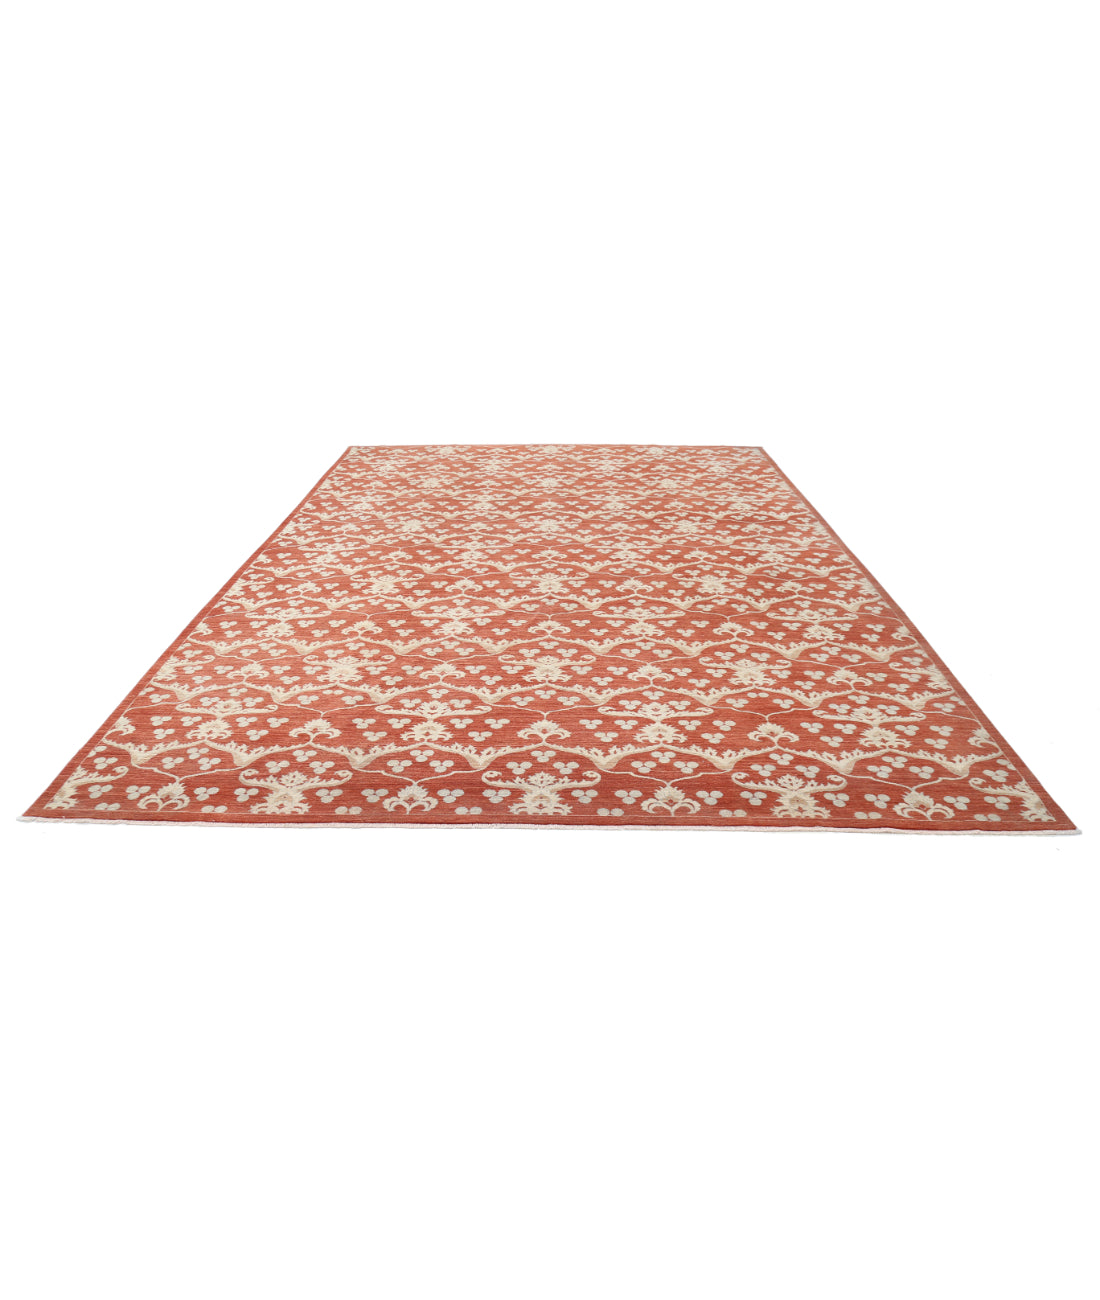 Artemix 9'8'' X 13'3'' Hand-Knotted Wool Rug 9'8'' x 13'3'' (290 X 398) / Rust / Ivory